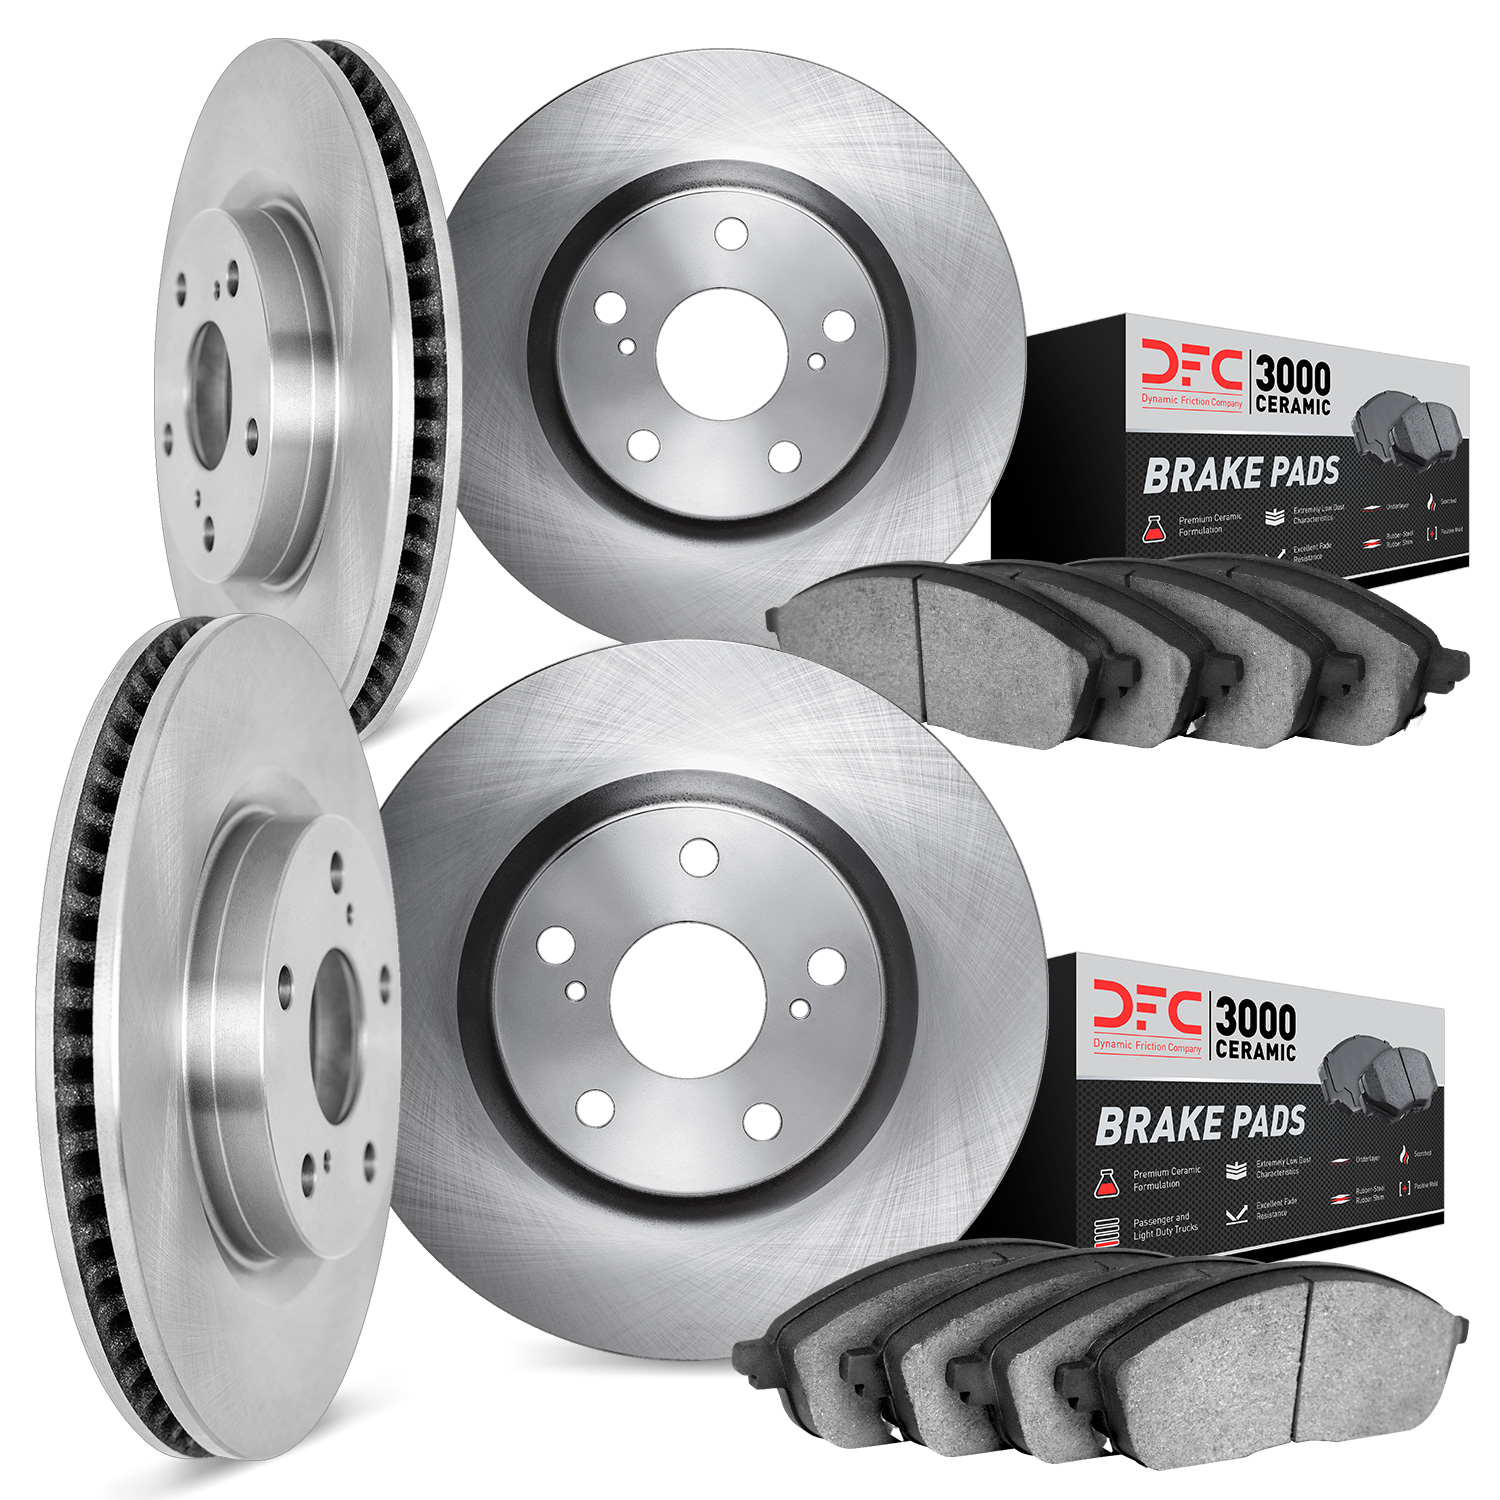 6304-75005 Brake Rotors with 3000-Series Ceramic Brake Pads Kit, 1993-1994 Lexus/Toyota/Scion, Position: Front and Rear